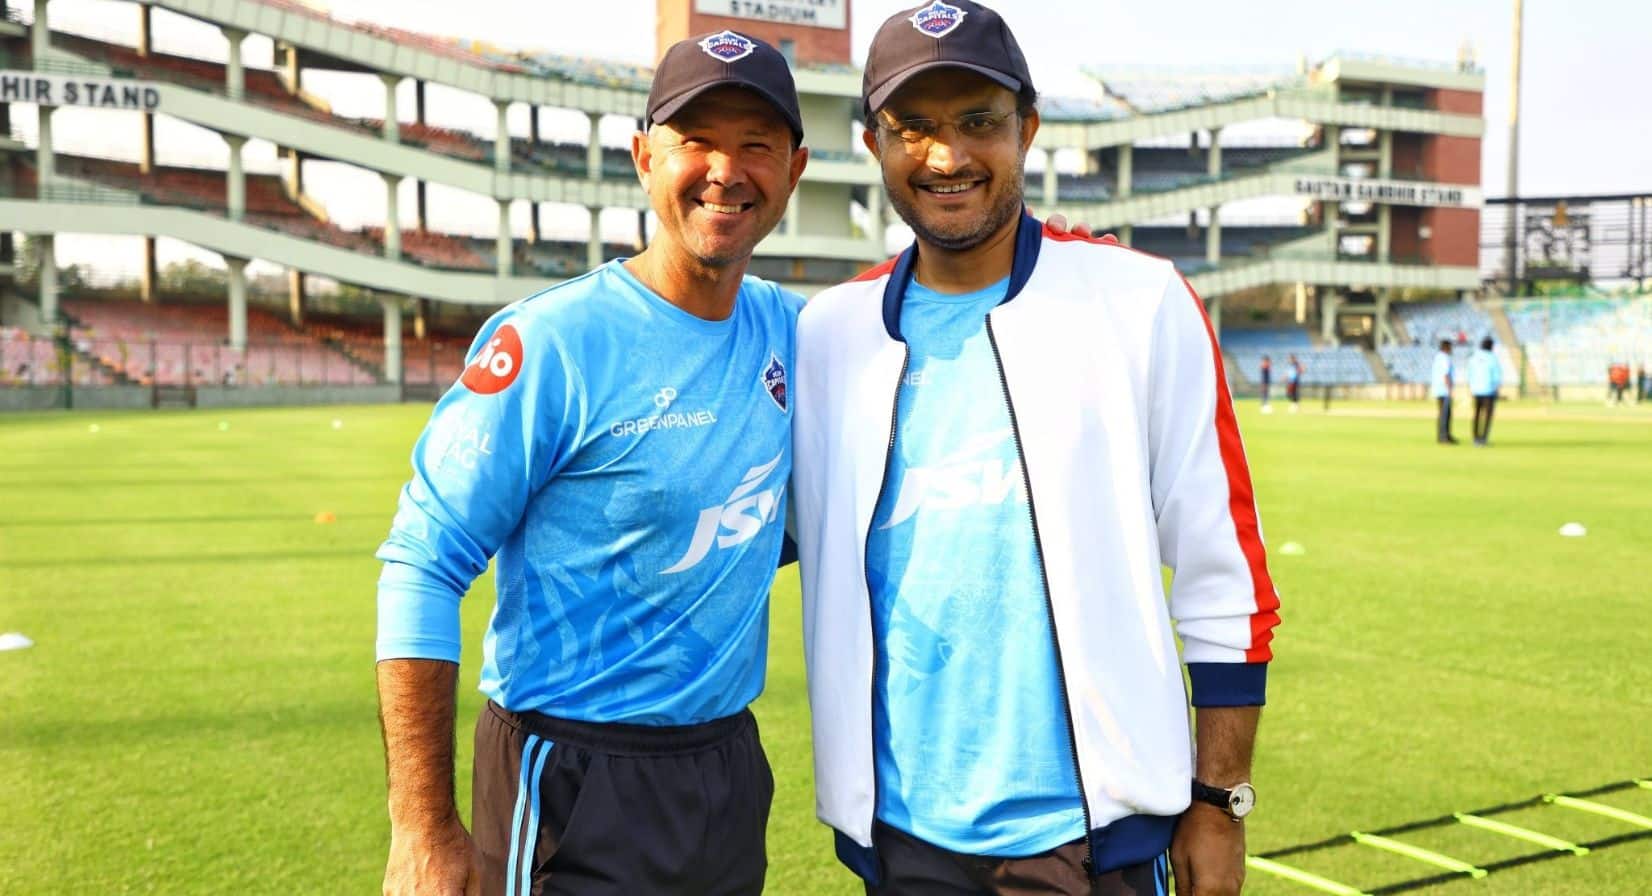 Ricky Ponting and Sourav Ganguly Set to Continue With Delhi Capitals, Owner Parth Jindal Confirms